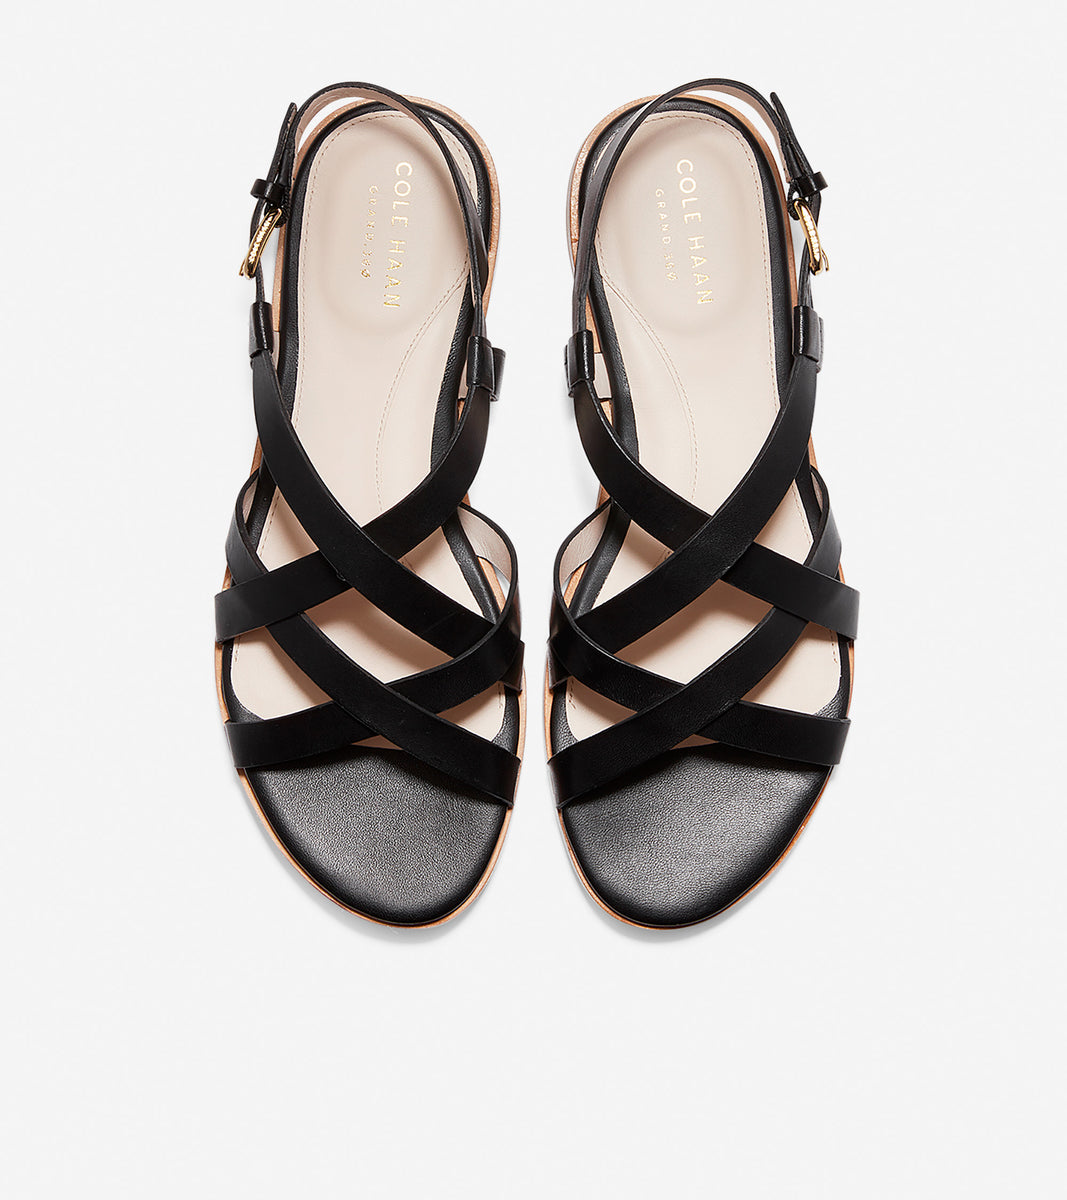 ColeHaan-Analeigh Grand Strappy Sandal-w14372-Black Leather